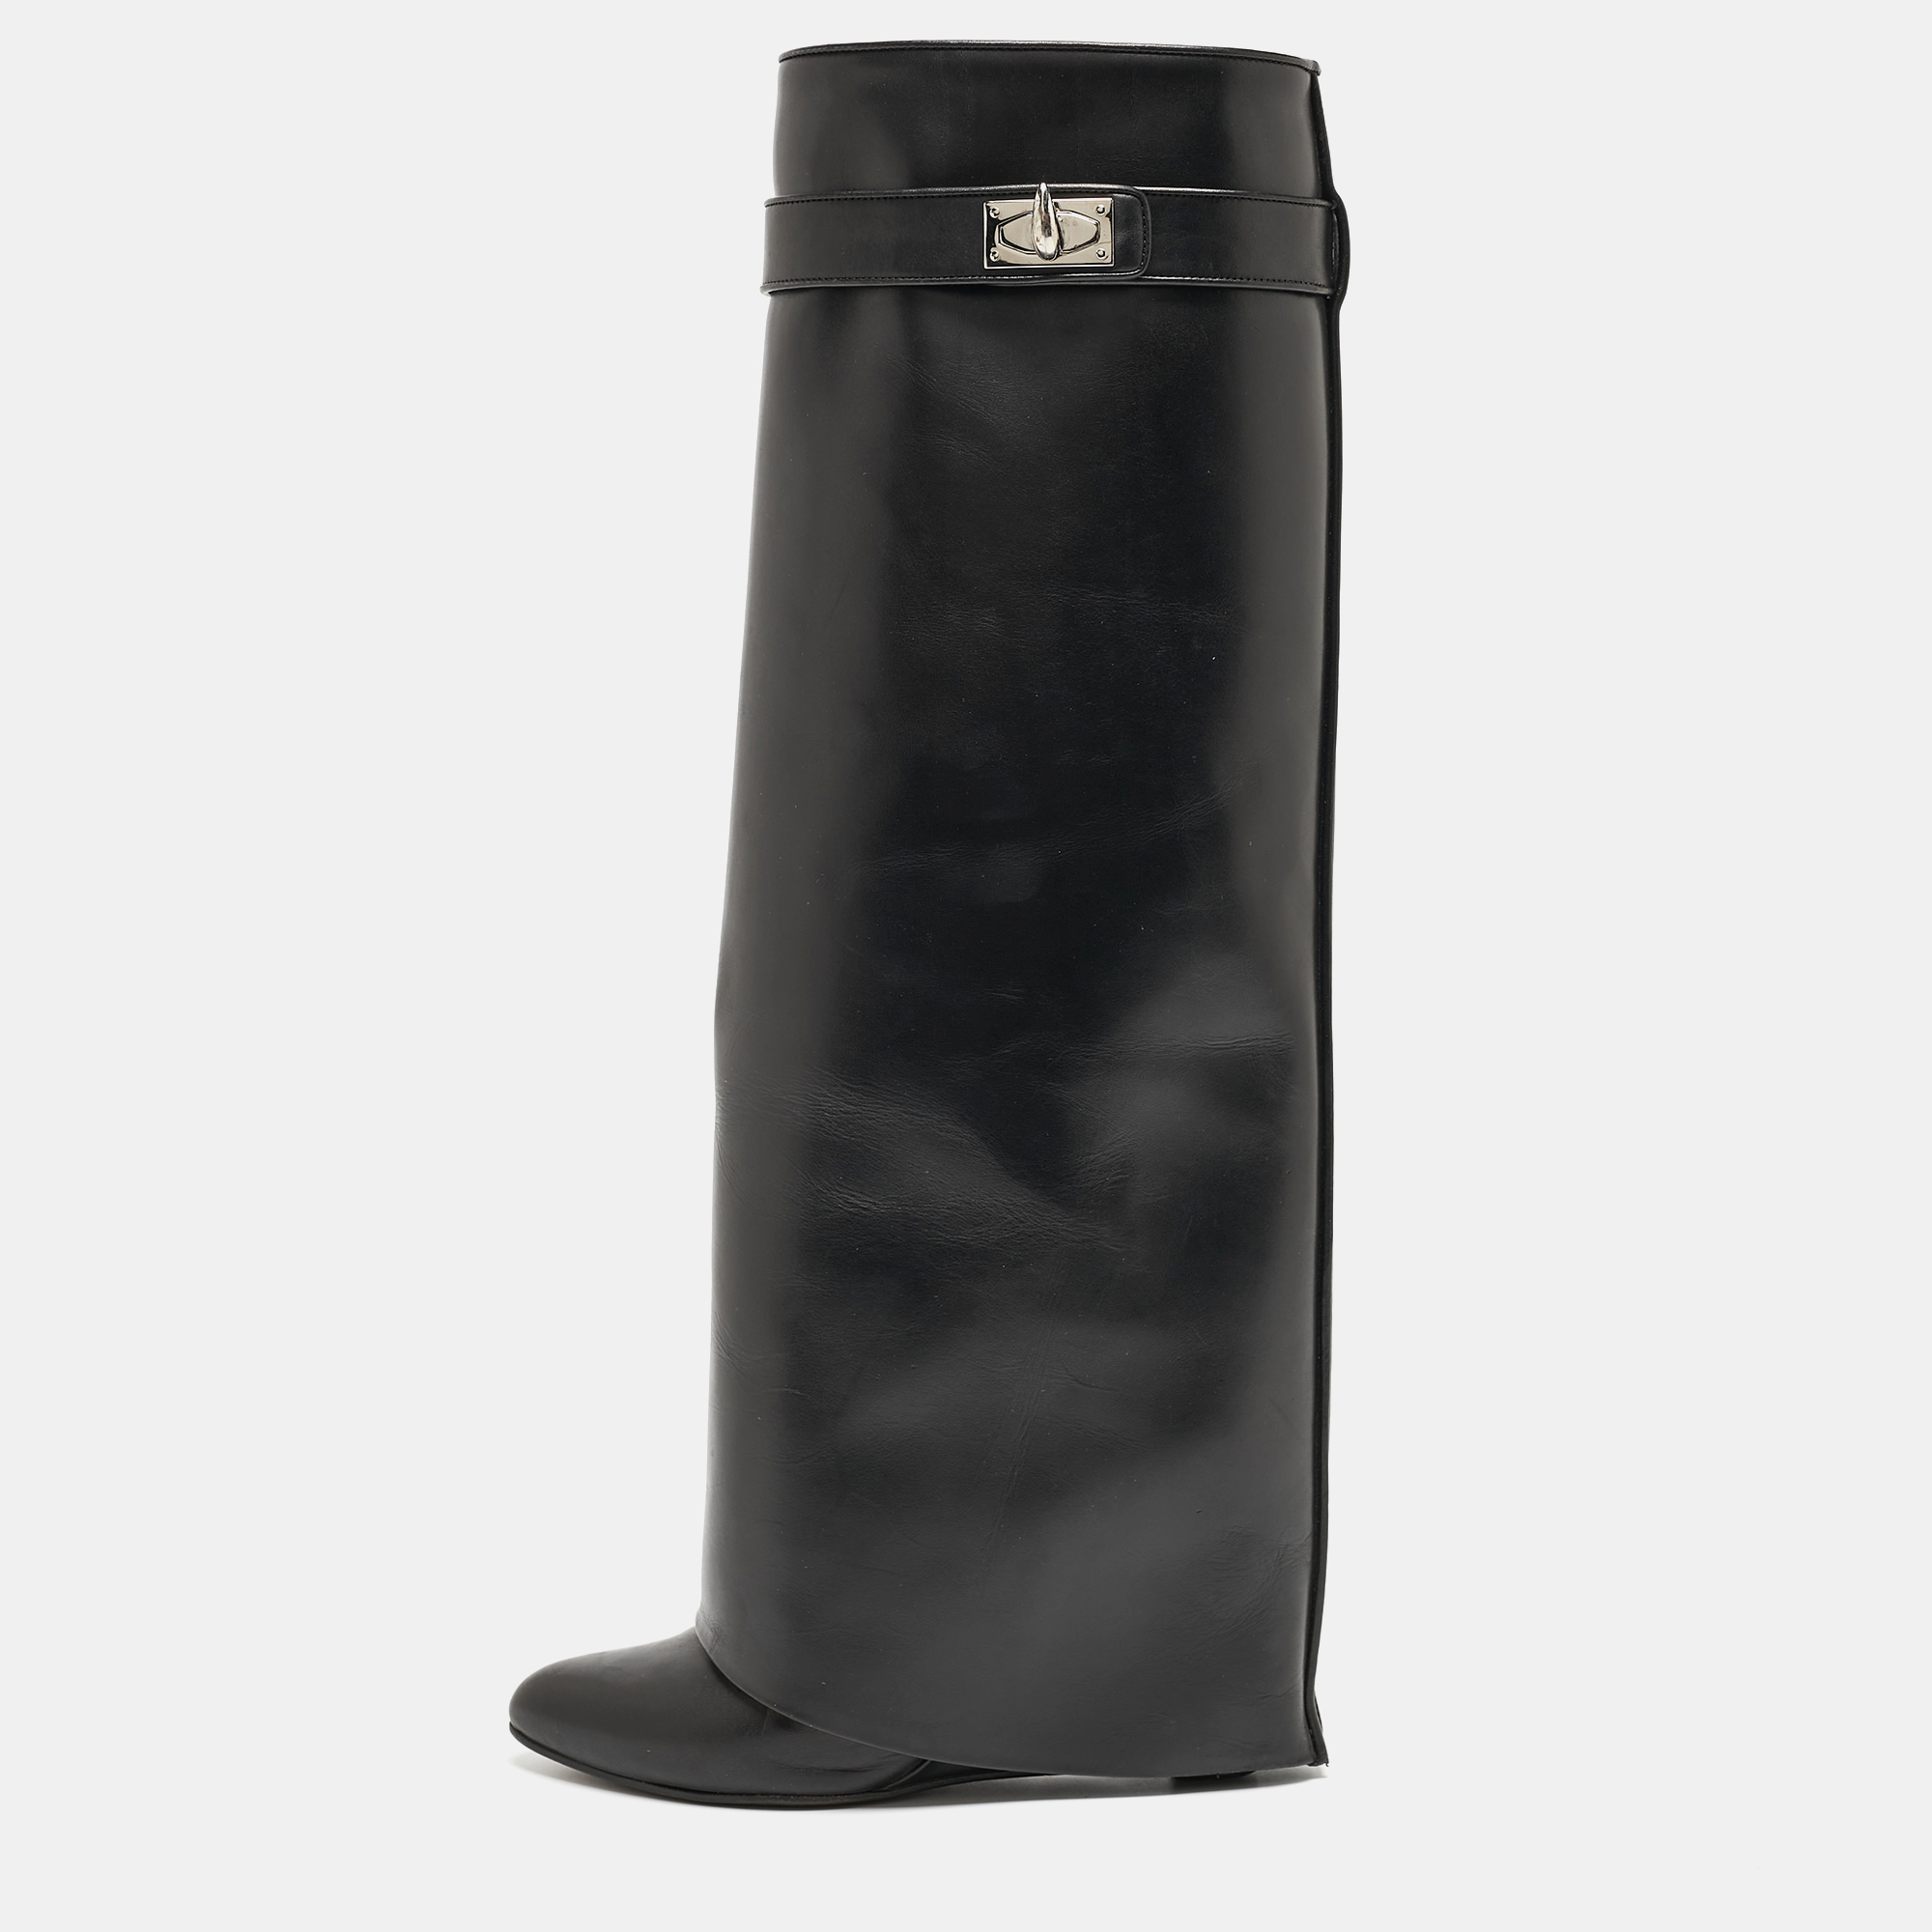 Givenchy black leather shark lock knee length boots size 36.5